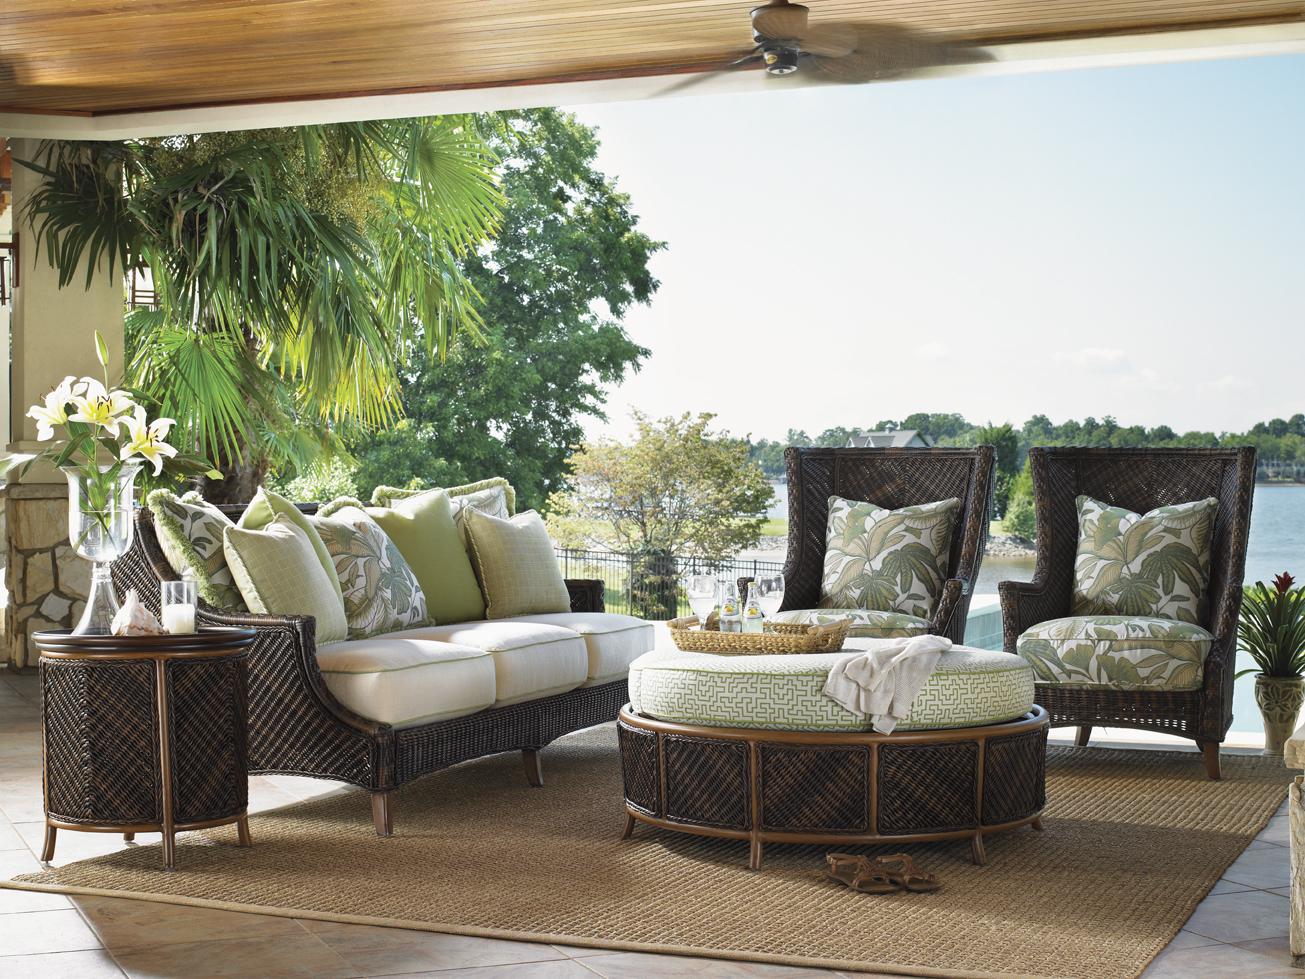 Baer's Furniture Store: Prepare Your Tropical Patio Decor for Spring